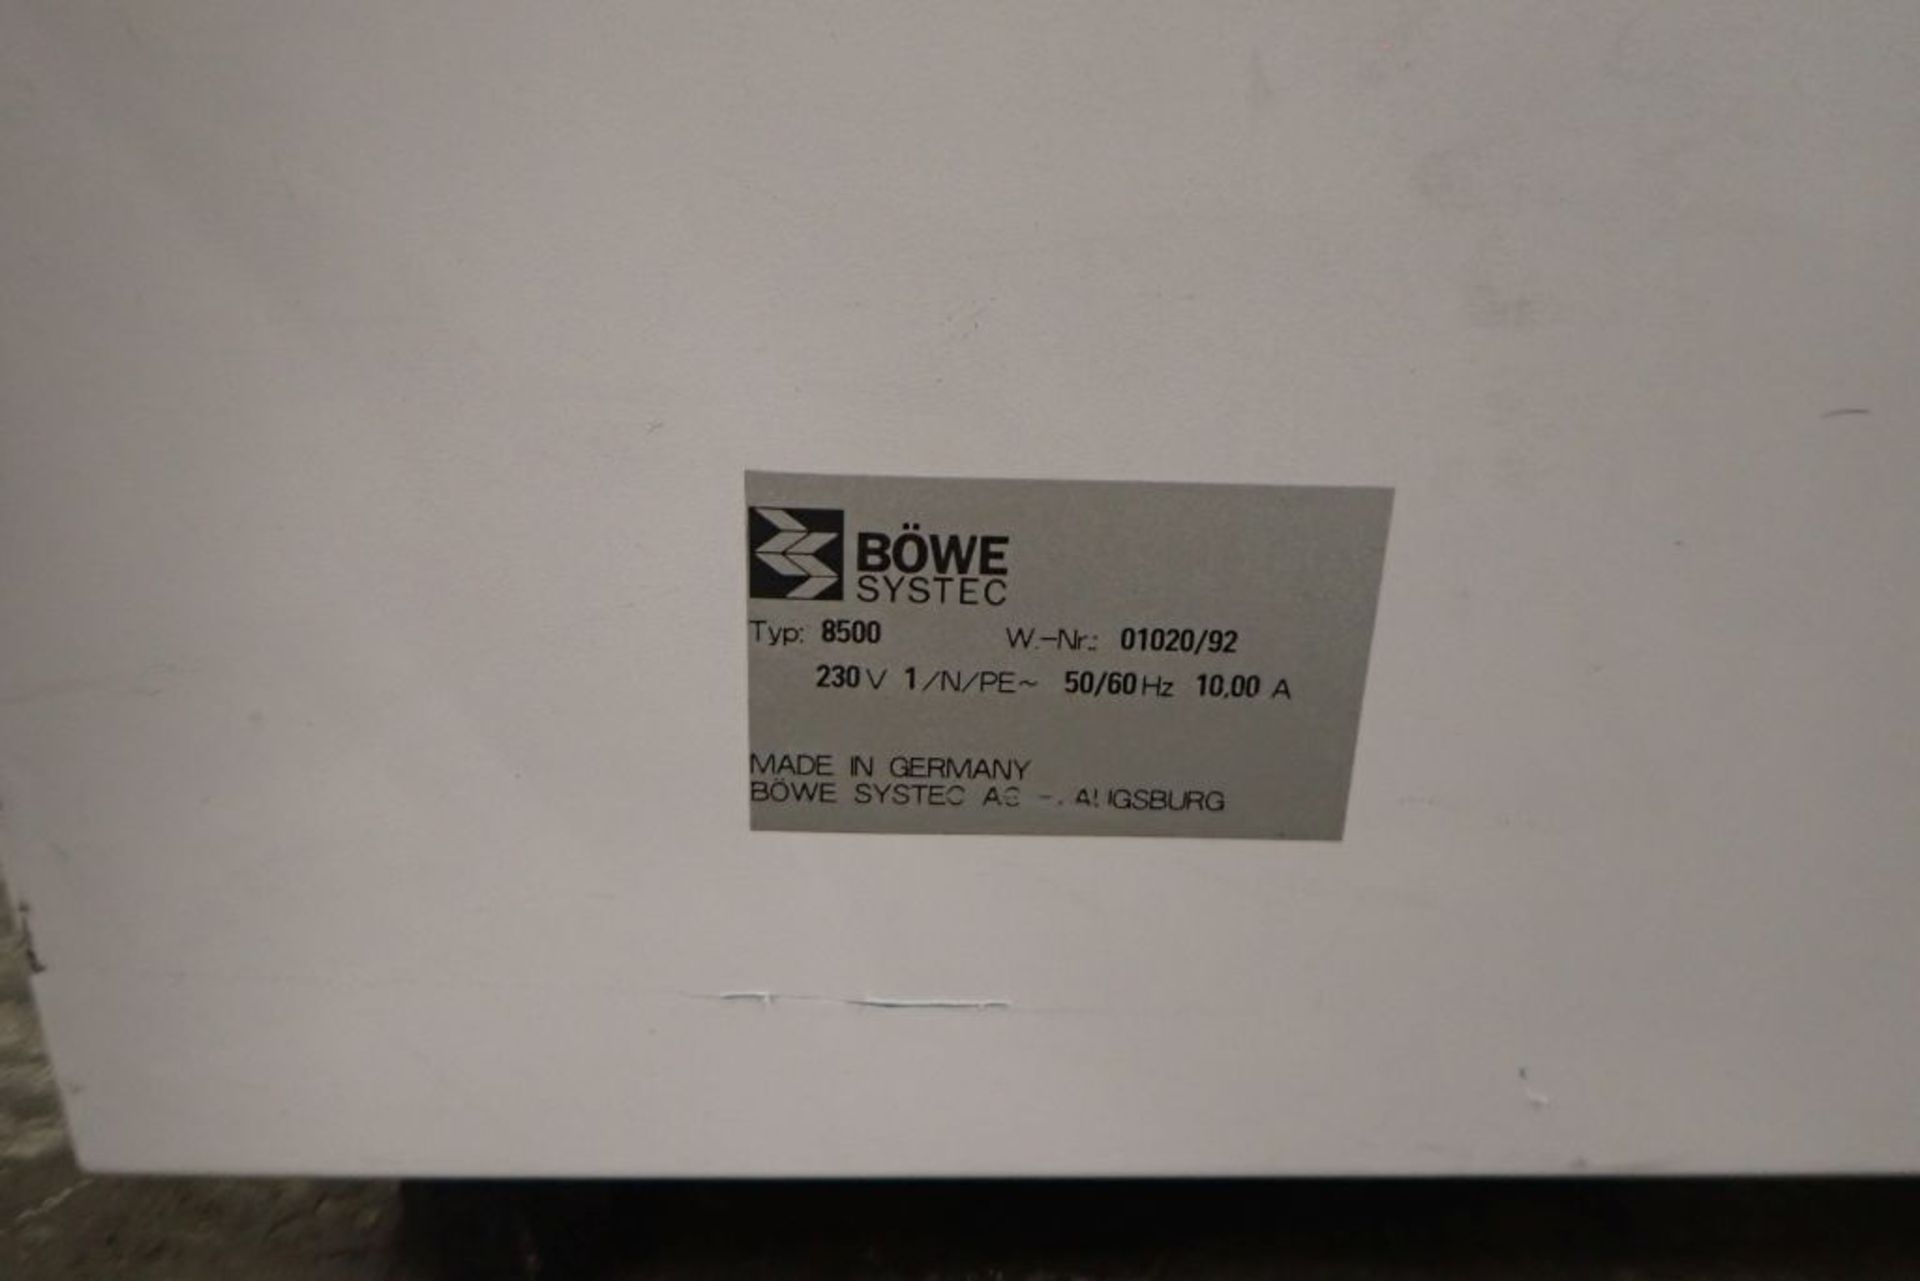 Bowe Systec Turbo Premium Automatic Mailing System - Image 342 of 356